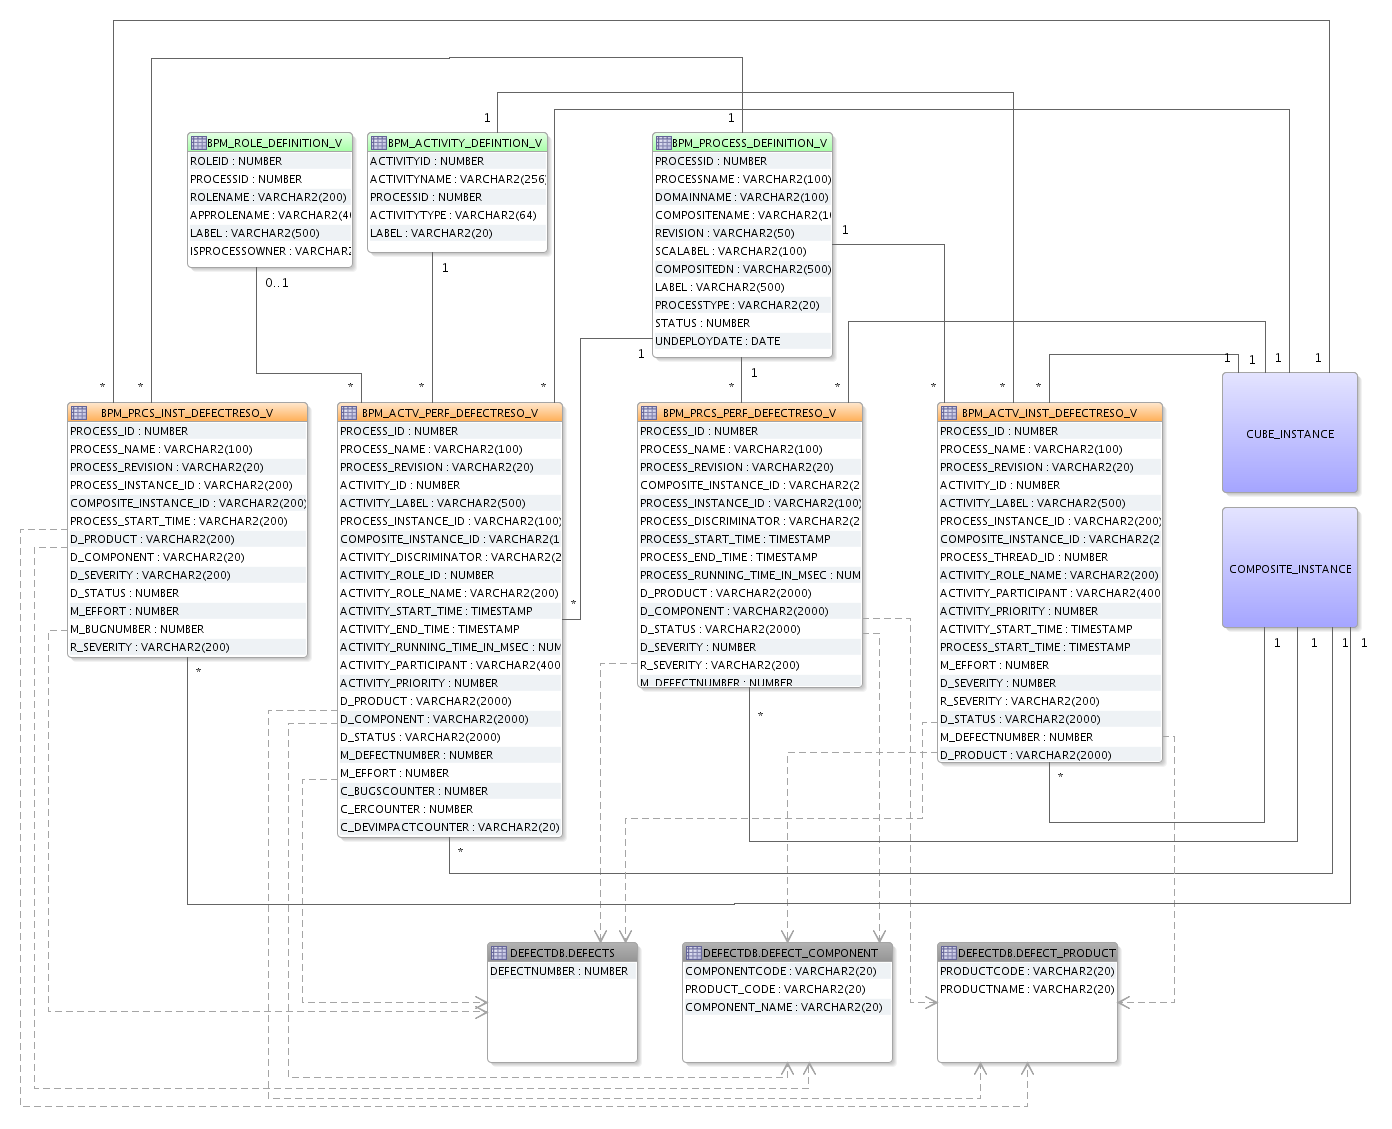 Shows process star schema for process-specific views.